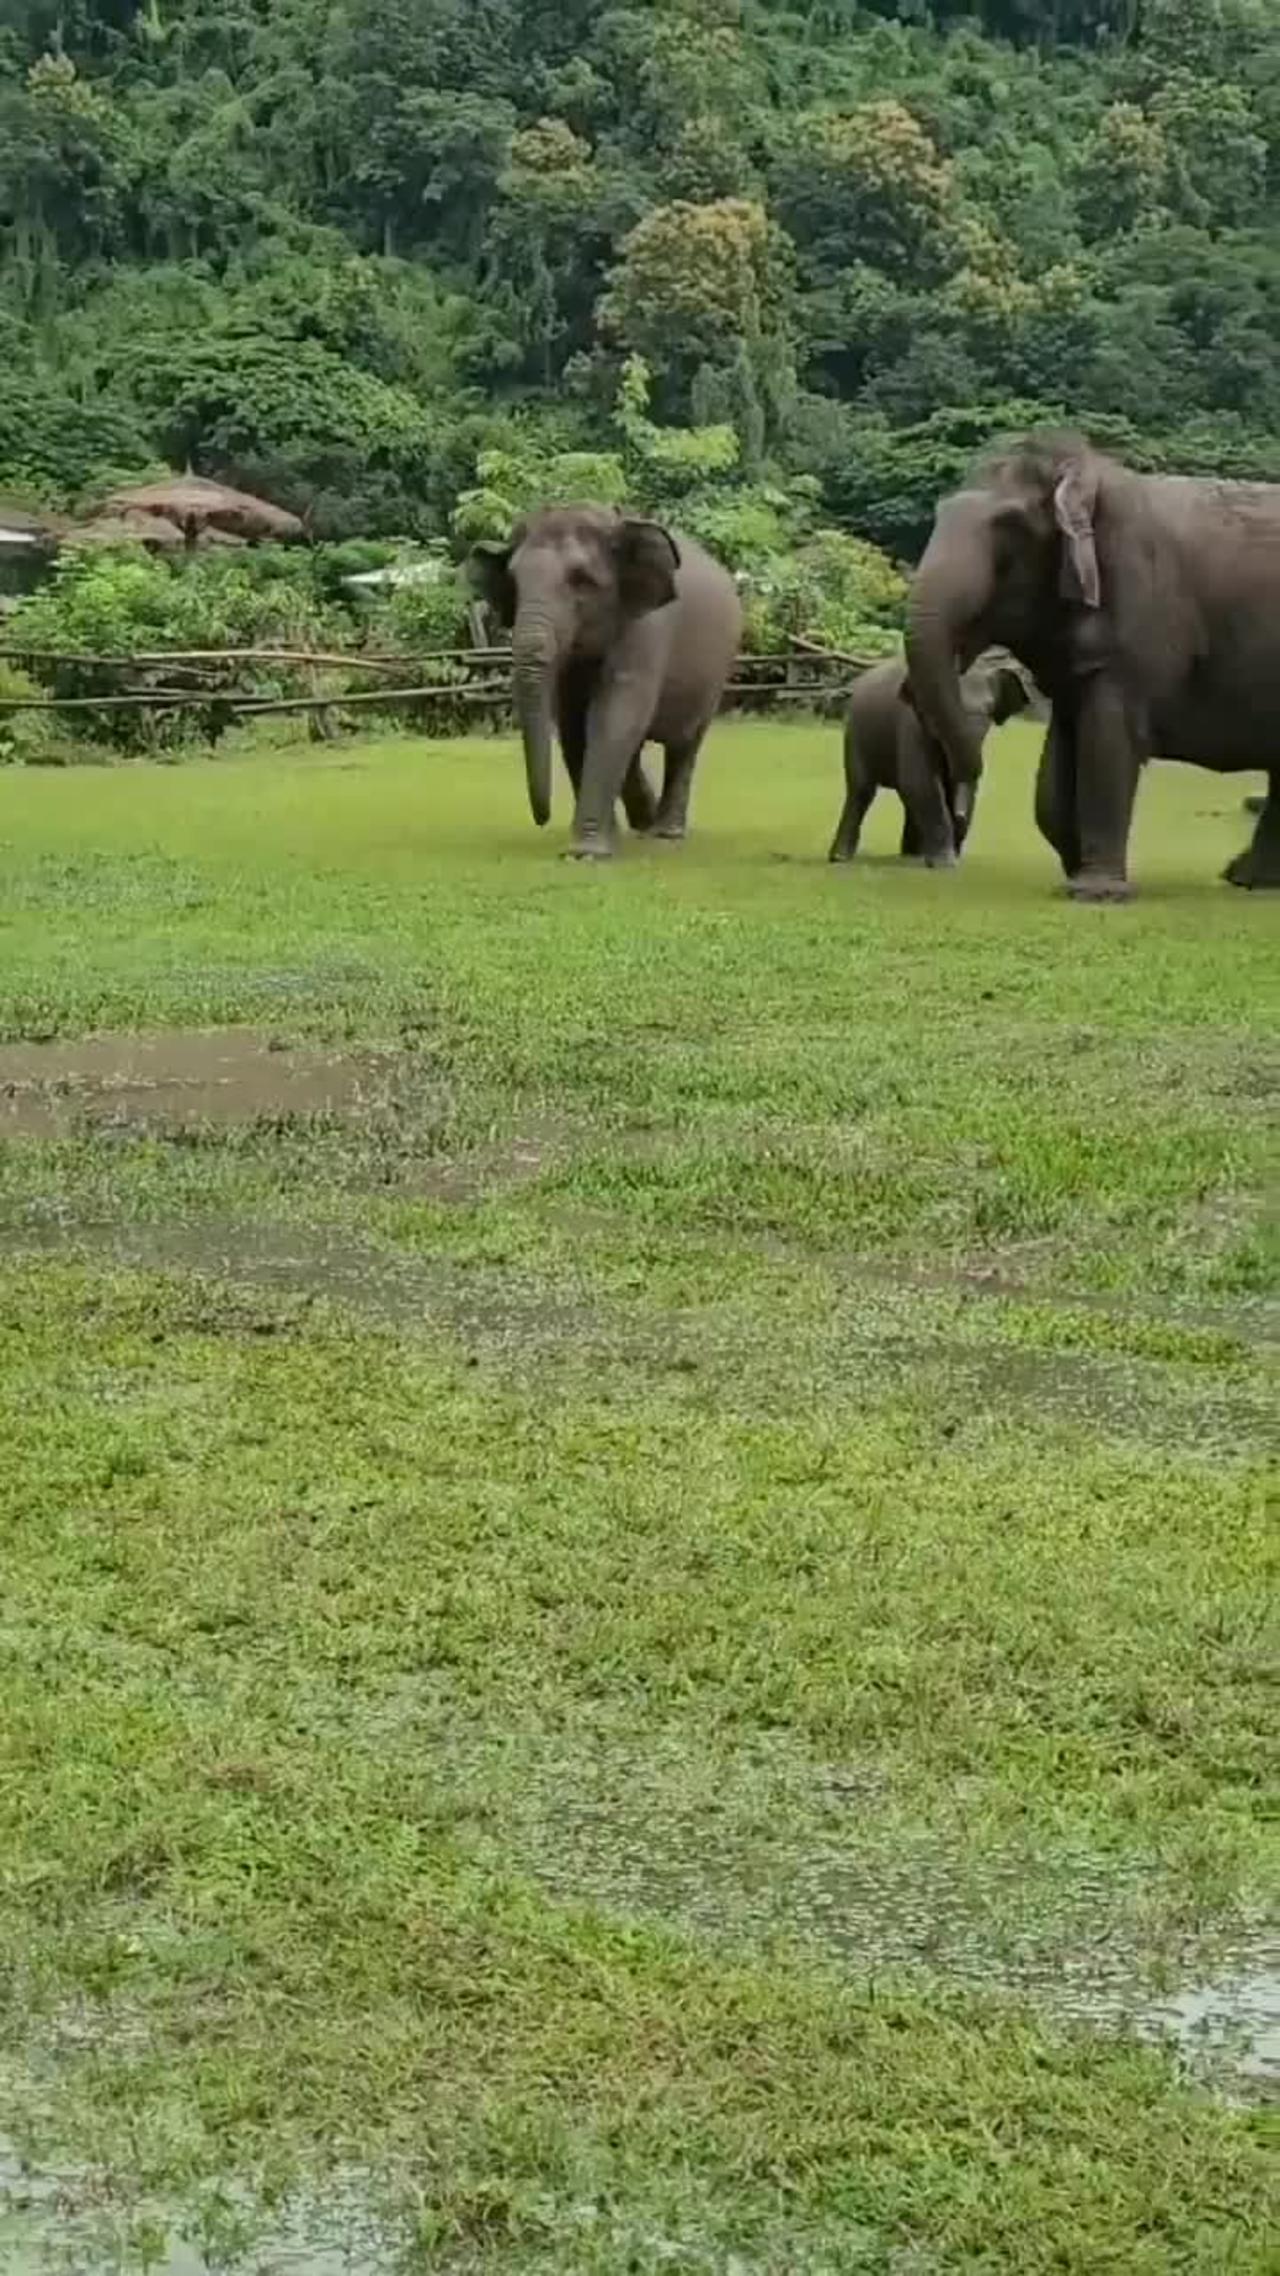 The Elephant Calf Is Chasing The Dog Elephant Calves And Dogs Funny Moment